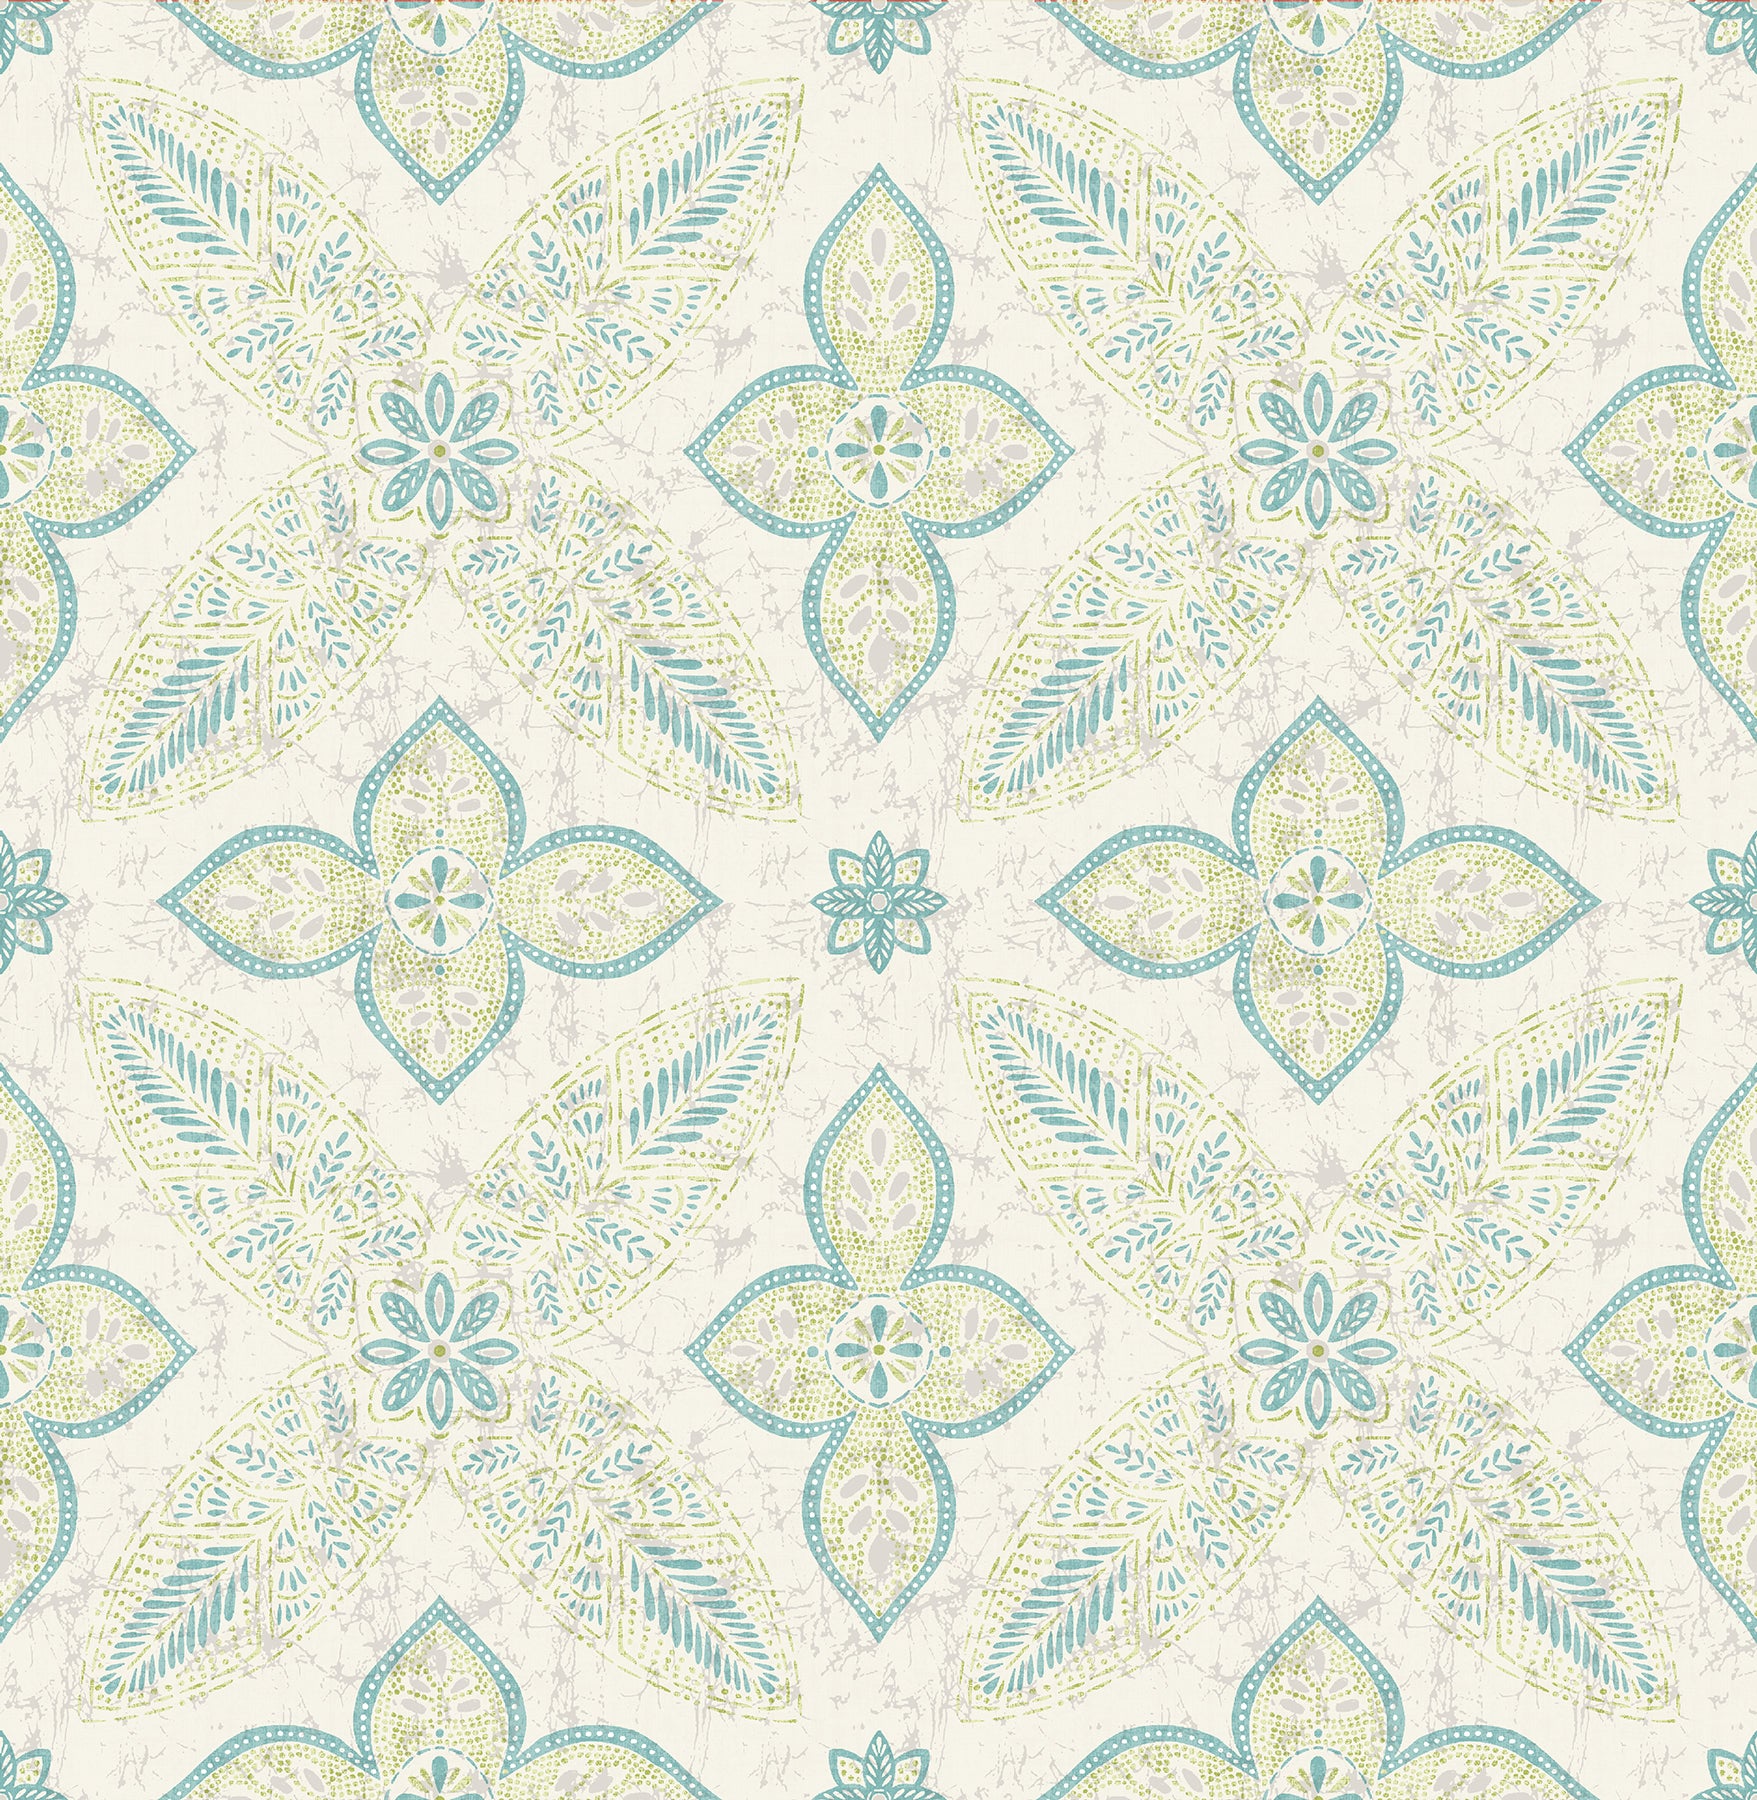 Purchase 1014-001829 Kismet Turquoise Off Beat Ethnic Turquoise Geometric Floral Wallpaper A Street Prints Wallpaper